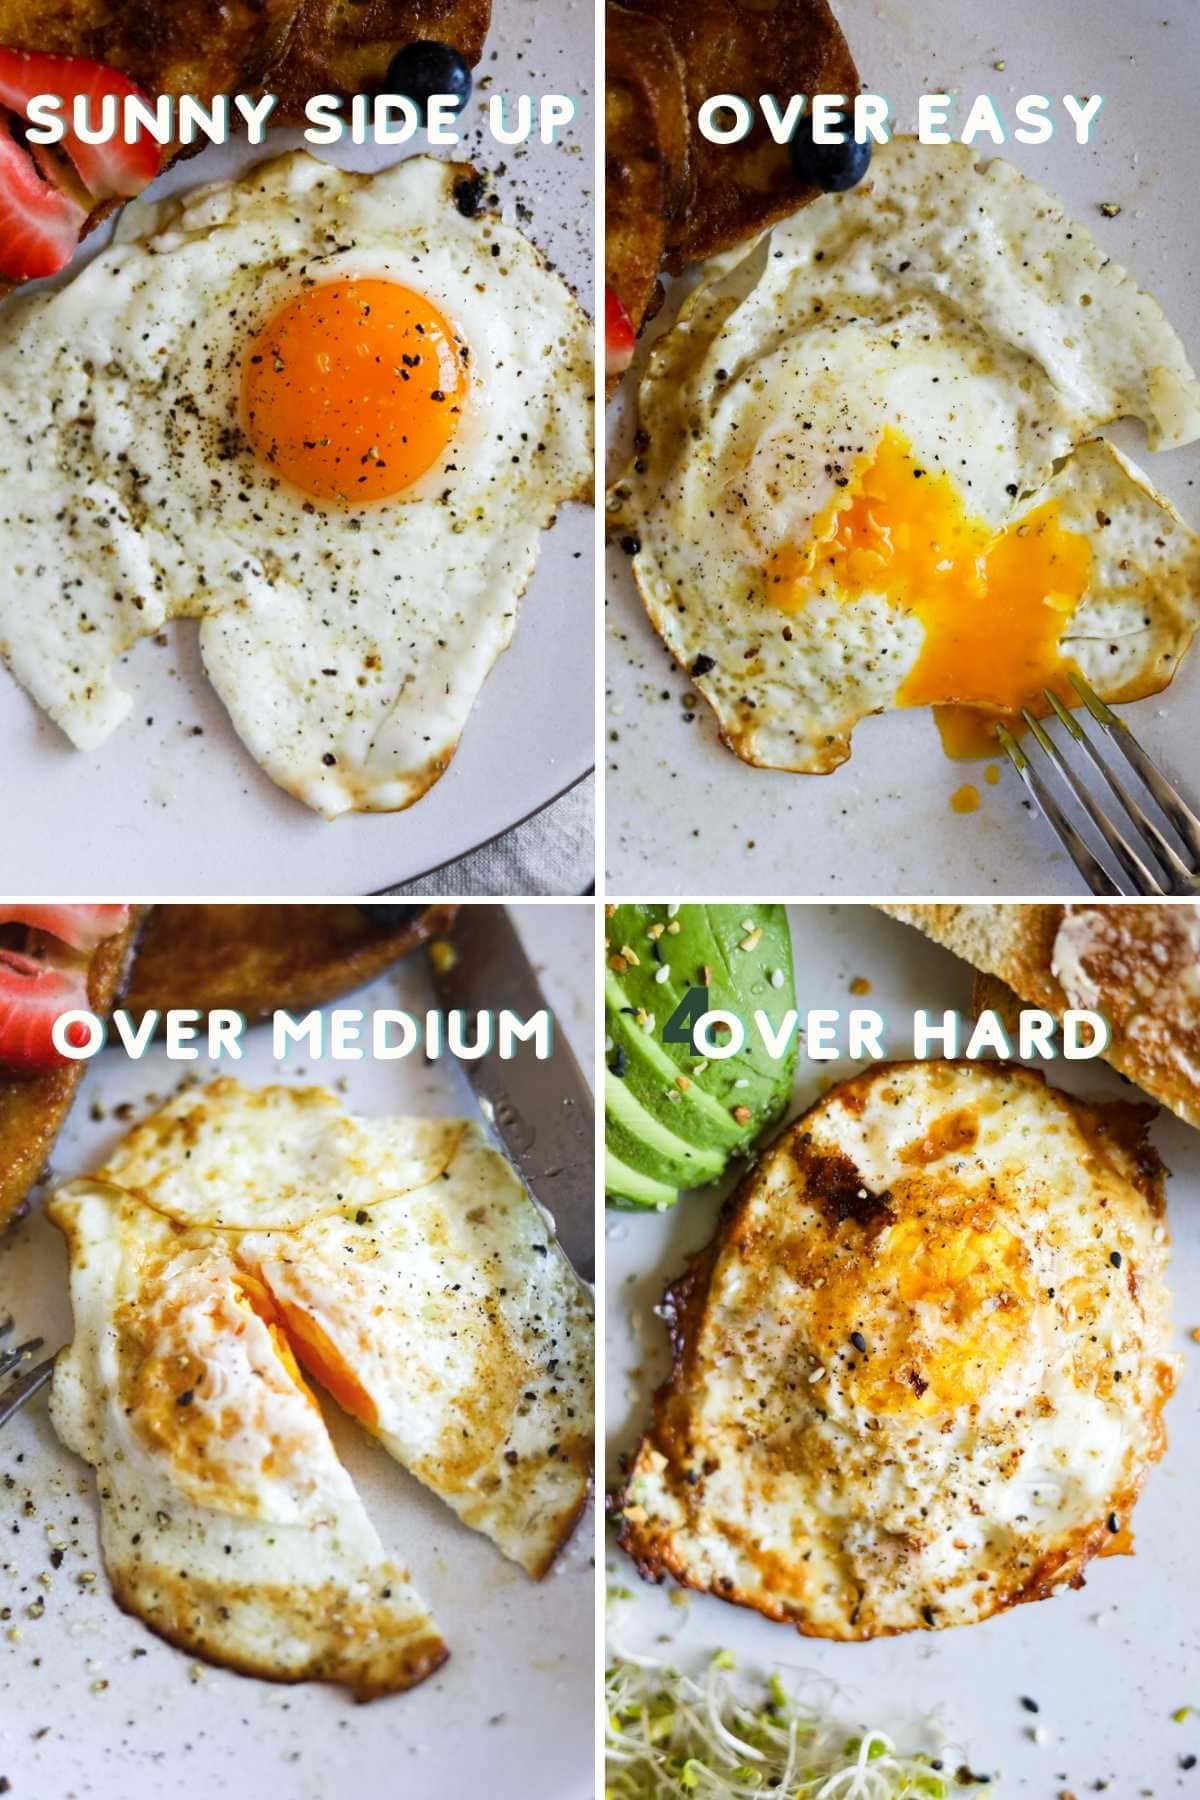 4 different ways to fry eggs: sunny side up, over easy, over medium, and over hard (well done).